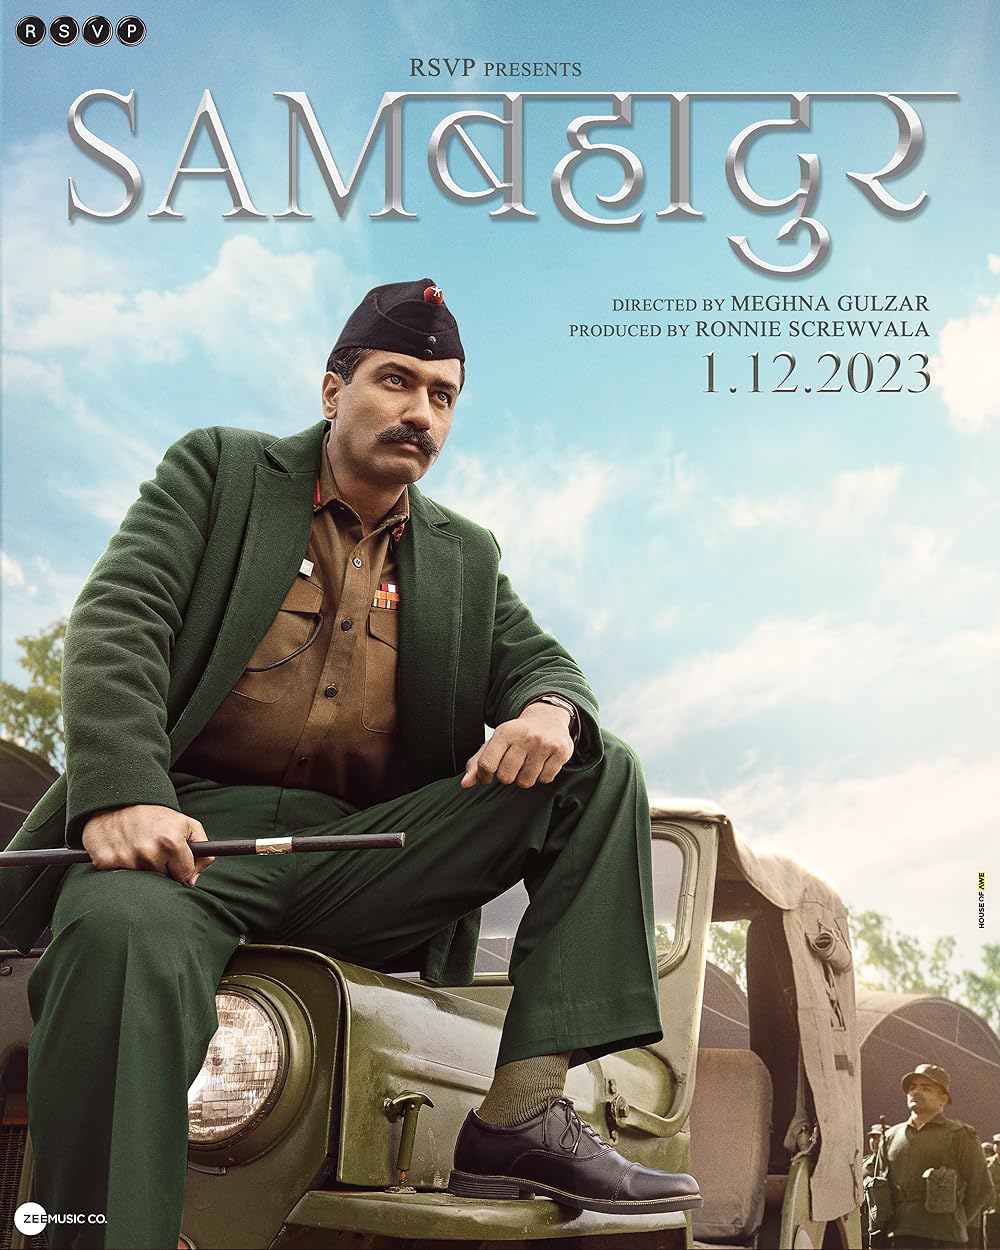 Sam Bahadur (January 26) - Streaming on ZEE5Sam Bahadur is a biographical war drama film chronicling the life of Sam Manekshaw, played by Vicky Kaushal, India’s first Field Marshal. The film spans Manekshaw’s career from his early days as a cadet in 1934 to his crucial role in the 1971 Indo-Pakistani War.